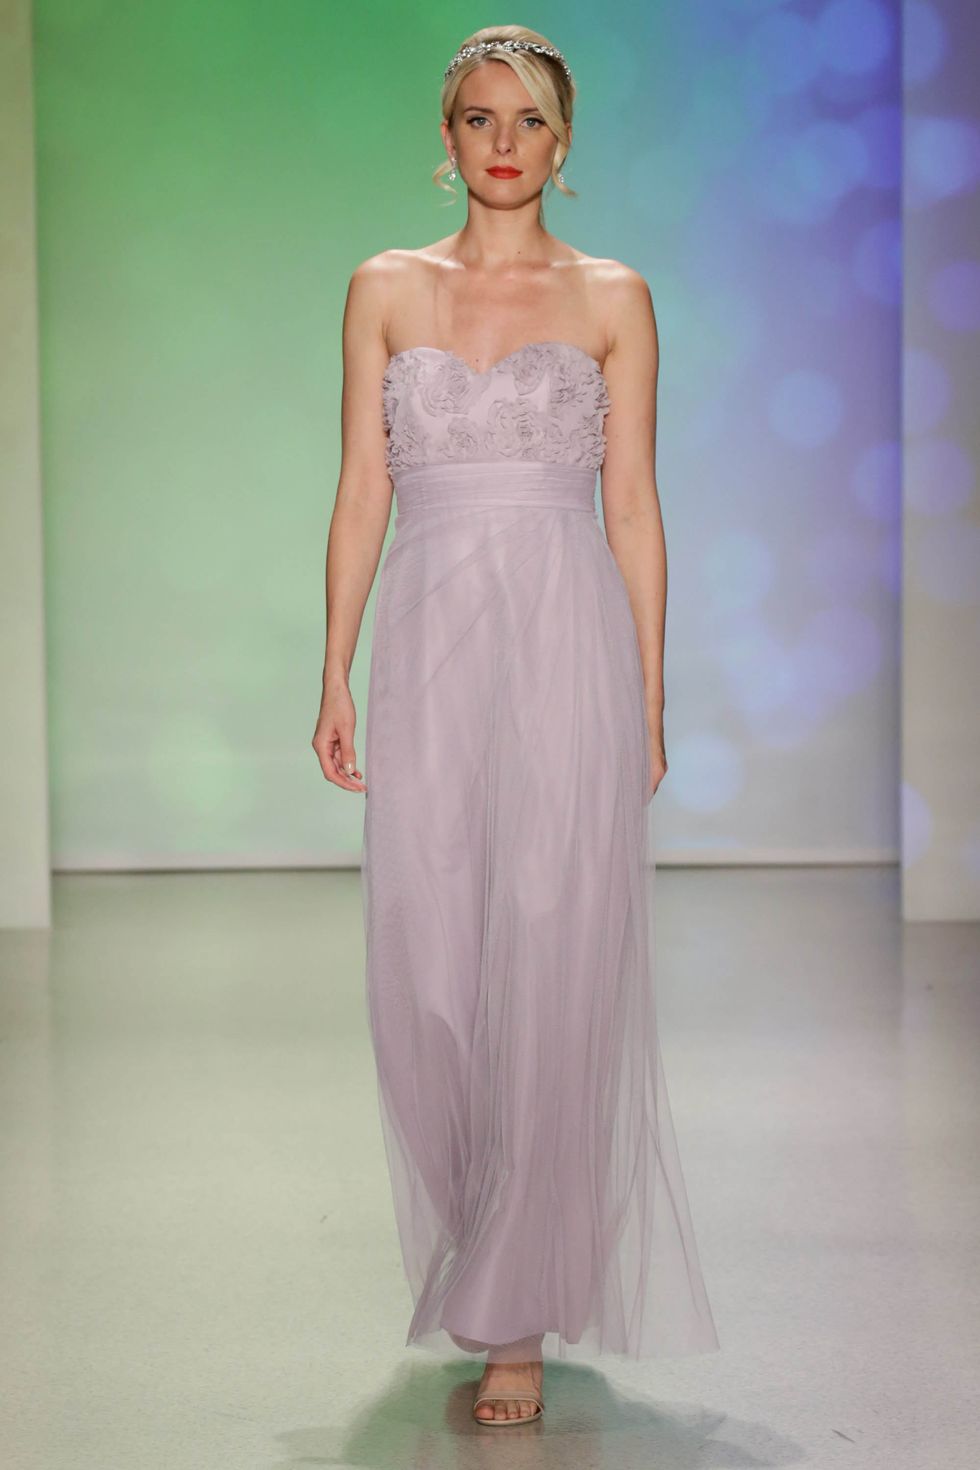 Alfred Angelo's Disney bridesmaid collection